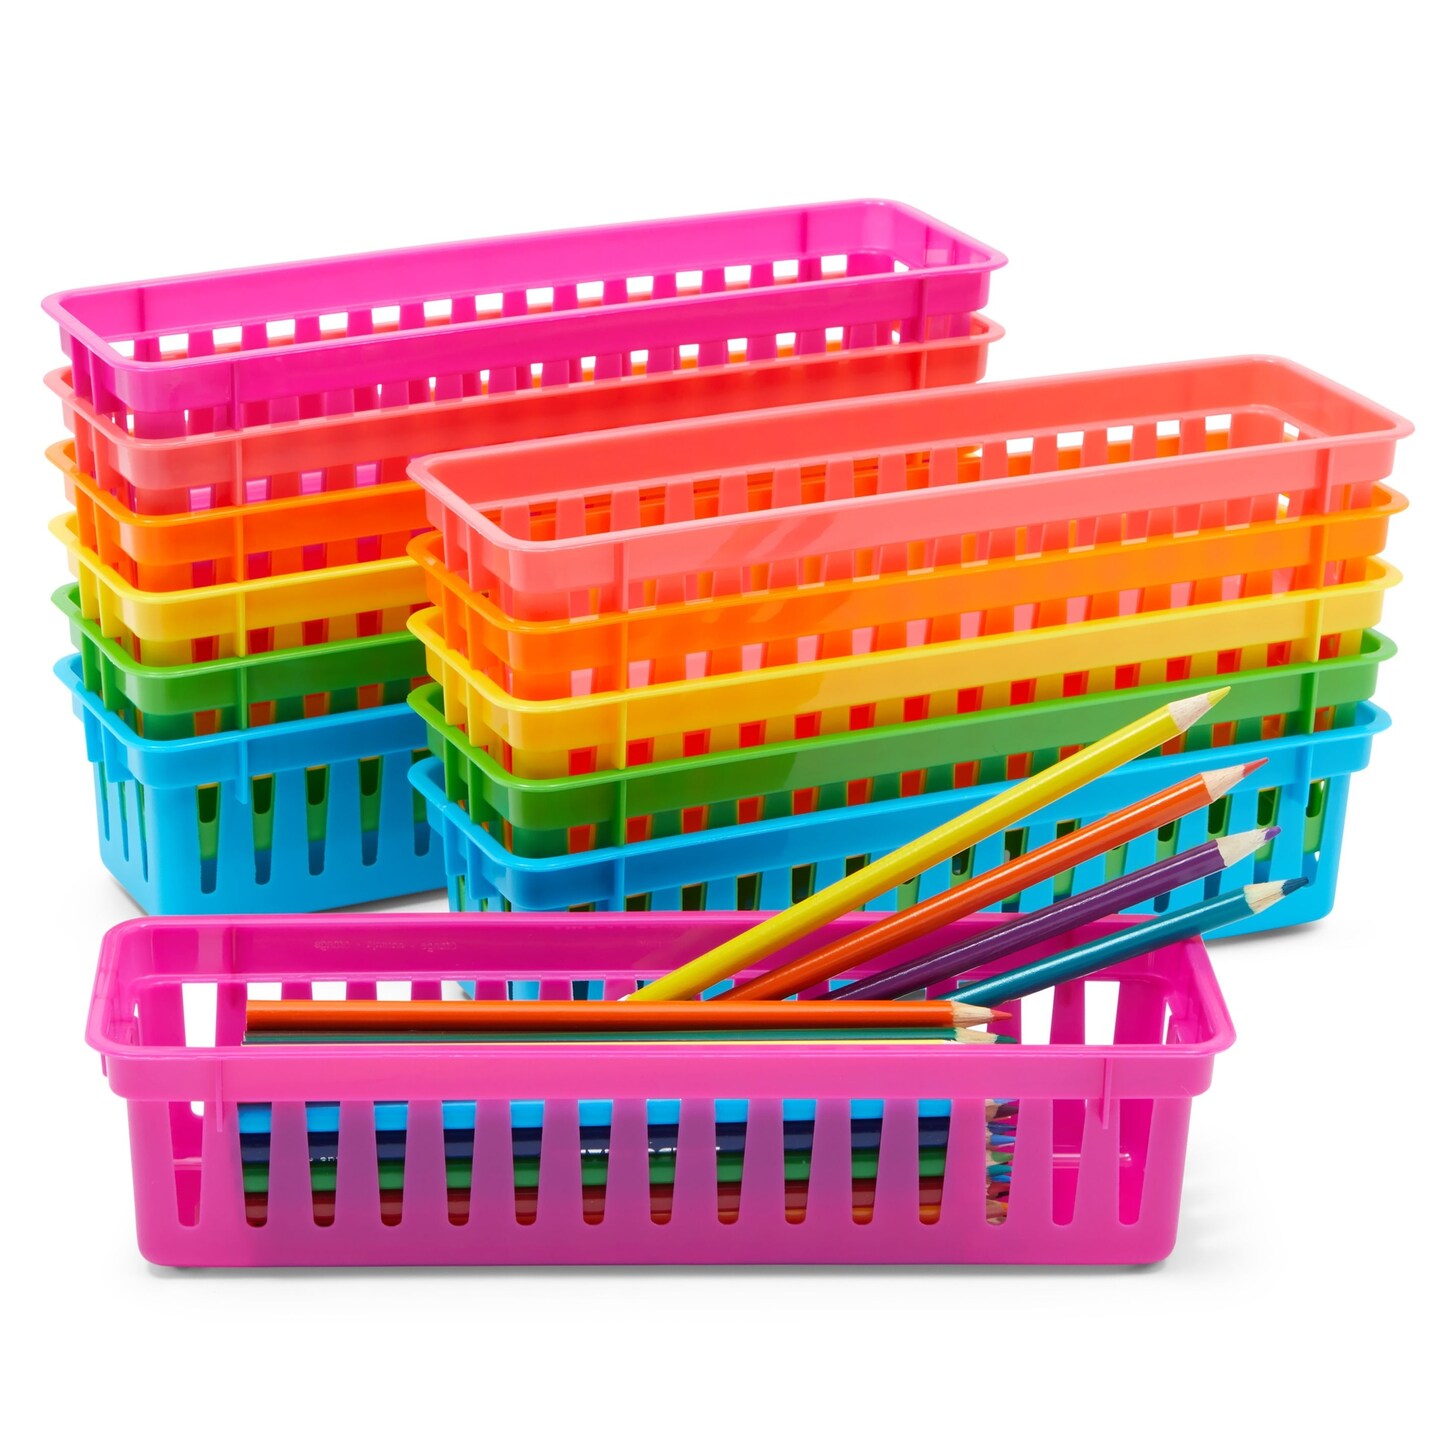 12-Pack Pencil Holder Trays and Organization Baskets - Plastic Caddy for Desk and Elementary Teacher Supplies for Classroom Decoration (Rainbow)